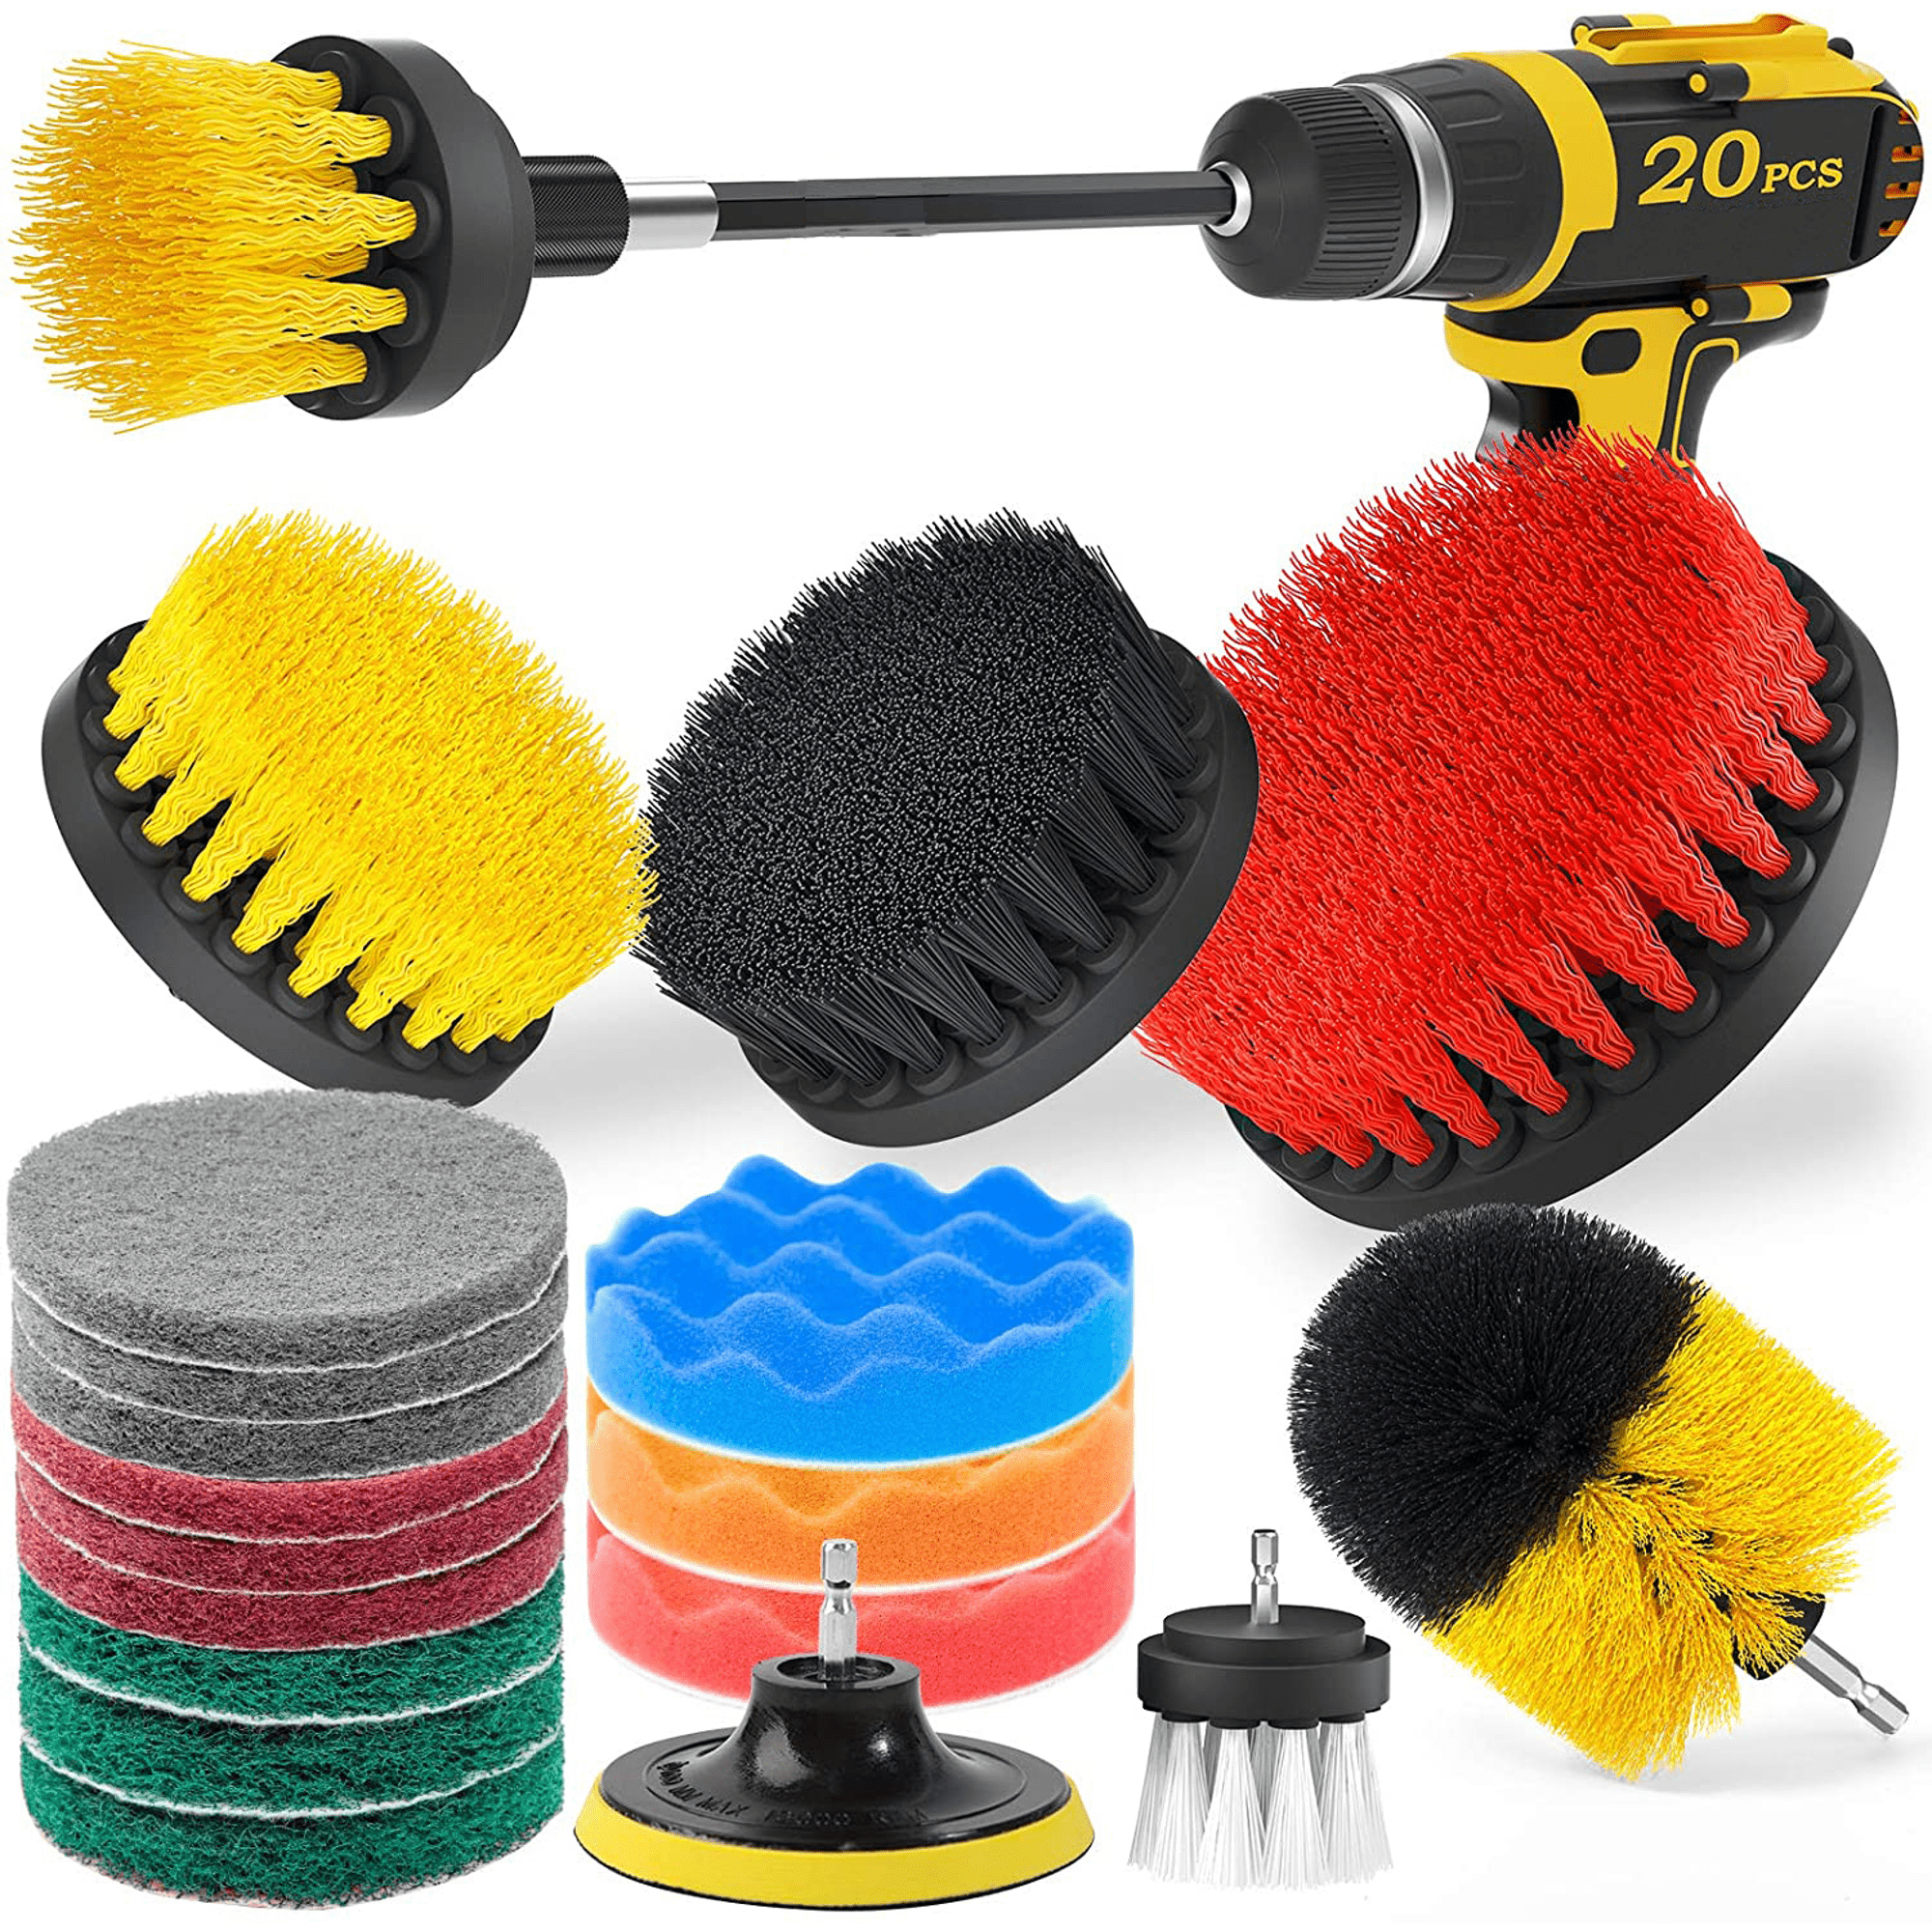 2PC Bottle Cleaning Brush Set Flexible Scourer Cup Multi-Function Household Tool 